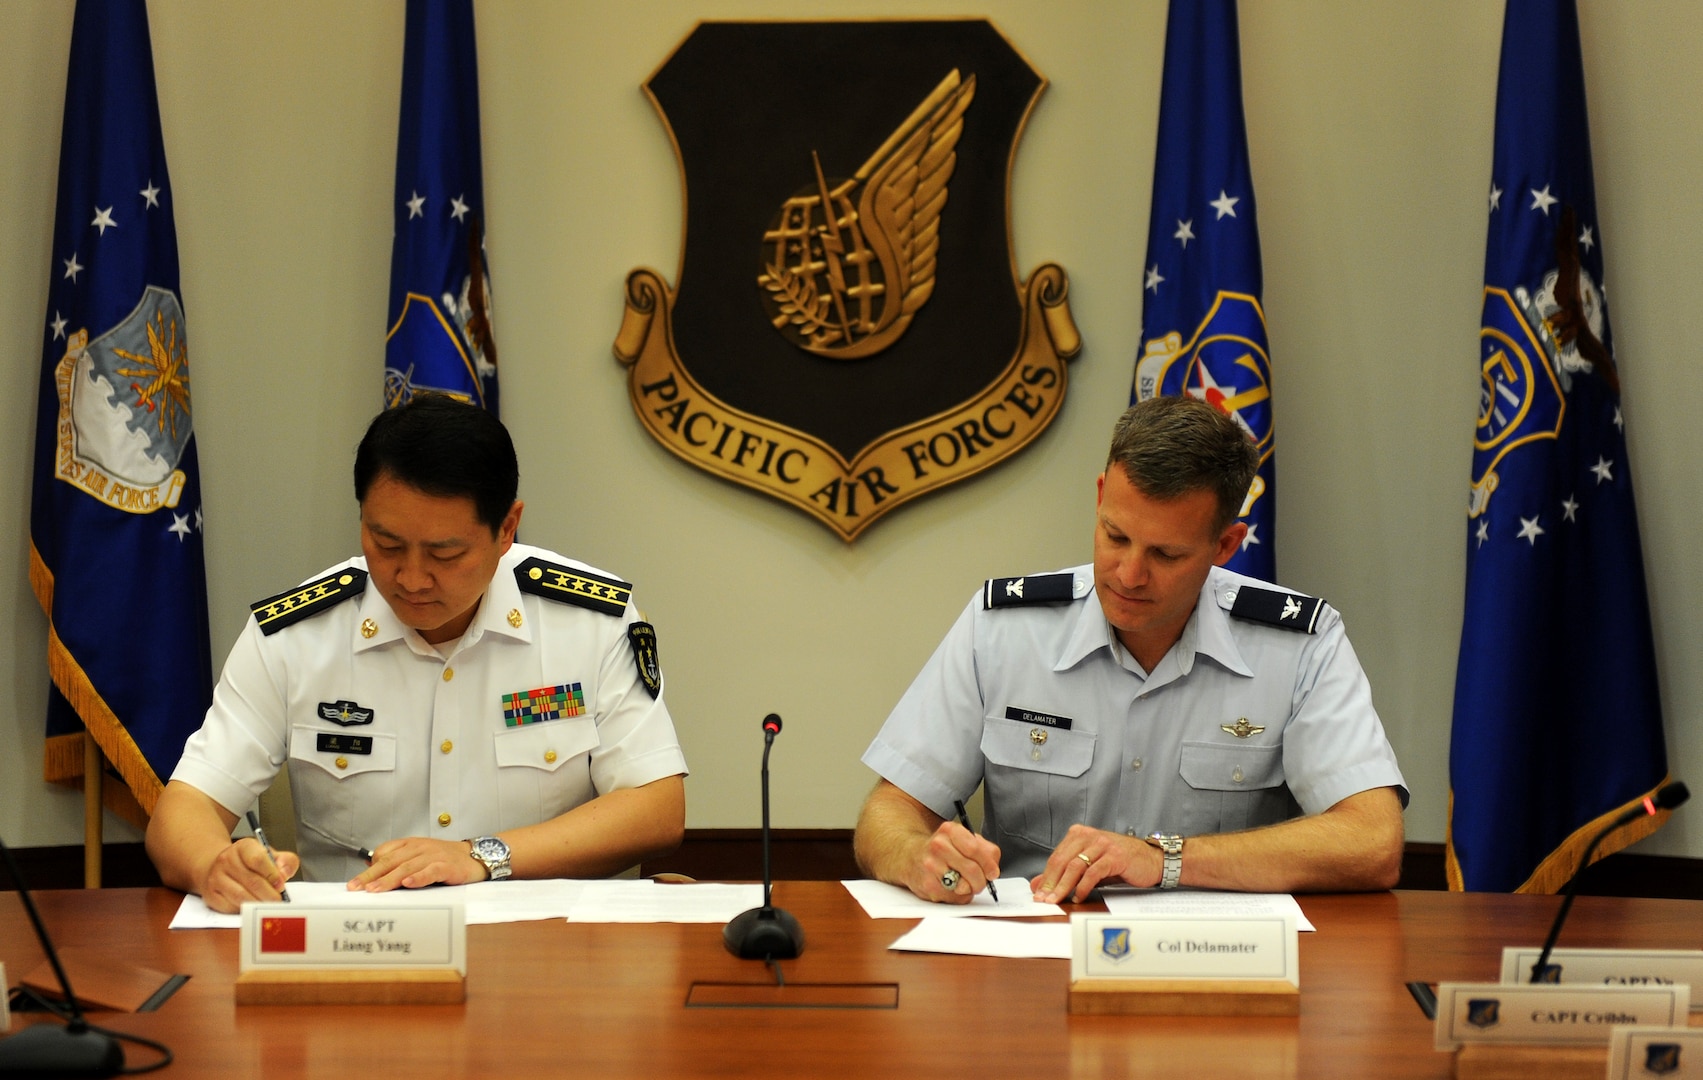 JOINT BASE PEARL HARBOR-HICKAM, Hawaii (Nov. 25, 2015) - U.S. Air Force Col. Brian Delamater, Chief of Pacific Air Forces Advanced and Warfighter Integration Division, and Senior Captain Liang Yang, Deputy Director Operations Department, Navy Headquarters, Peoples Liberation Army, sign the meeting minutes for the bi-annual Military Maritime Consultative Agreement (MMCA) talks, held Nov. 21-24, at Headquarters, Pacific Air Forces. The bilateral MMCA talks are a long-standing mechanism designed to provide open and transparent communication to address concerns and develop common understandings between U.S. and PRC air and naval forces in order to avoid unsafe incidents and minimize risk. (Photo by U.S. Pacific Air Forces Public Affairs)
